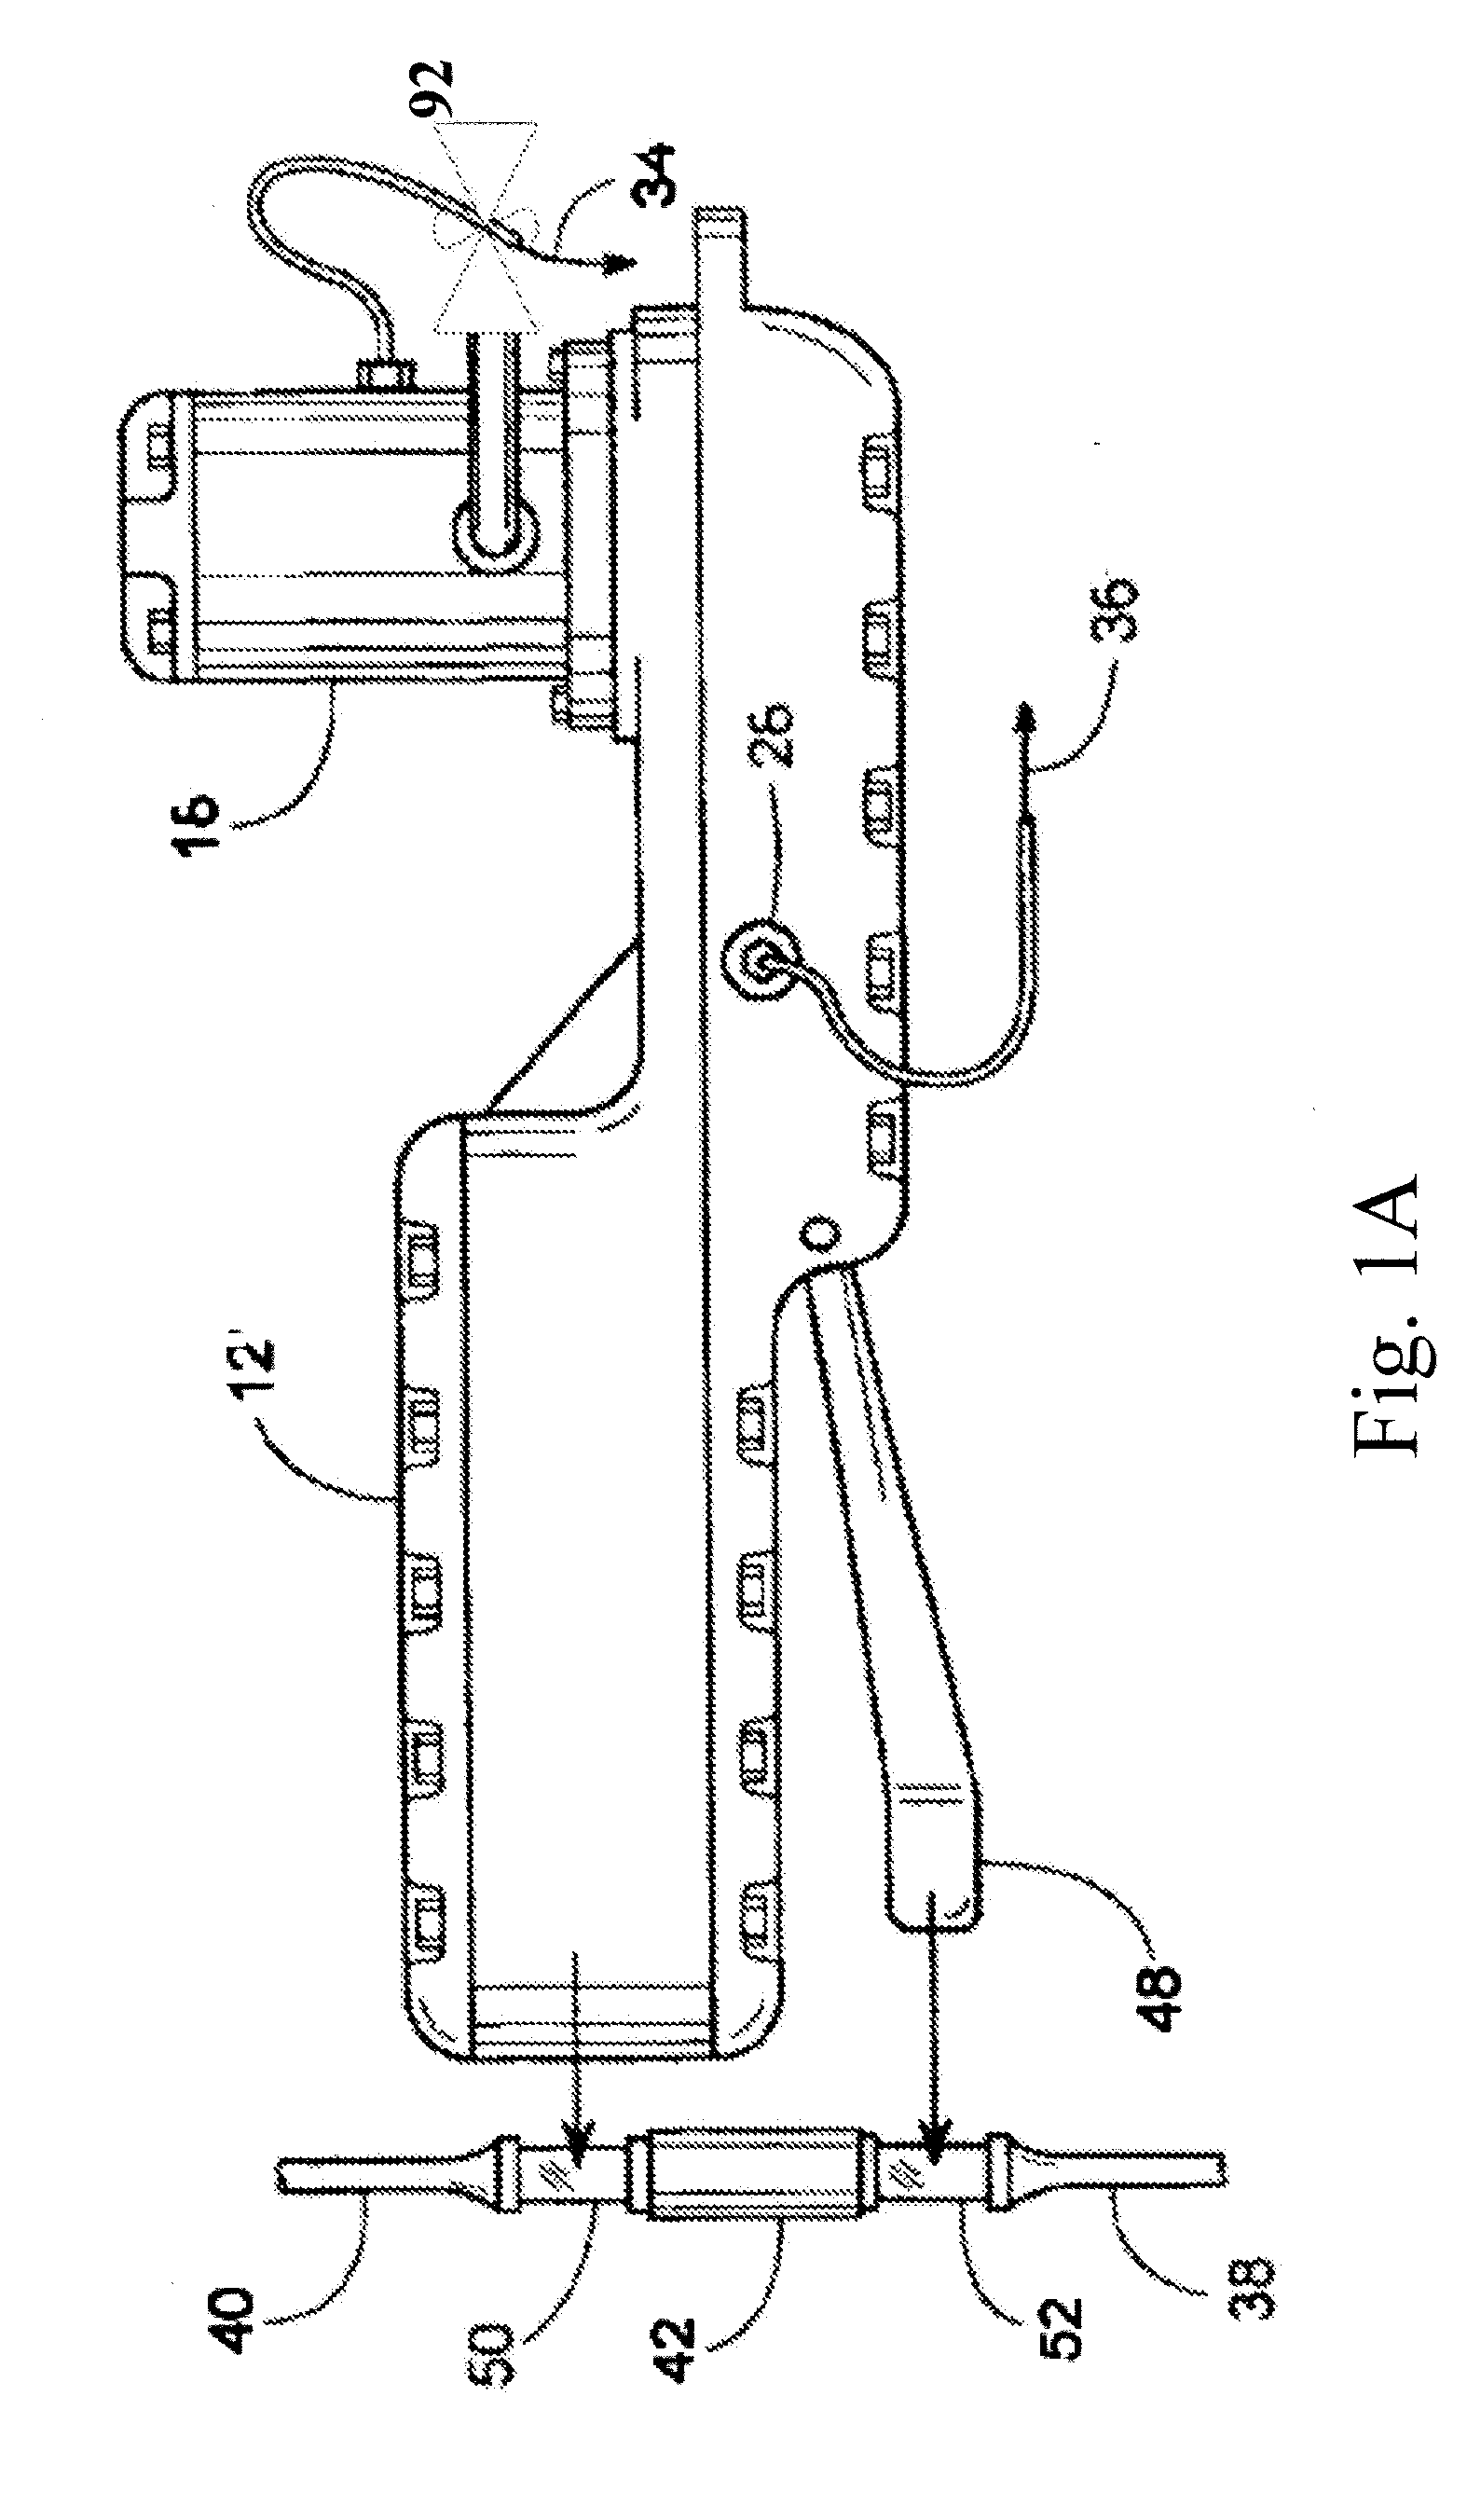 Method and System for Controlling Tongs Make-Up Speed and Evaluating and Controlling Torque at the Tongs